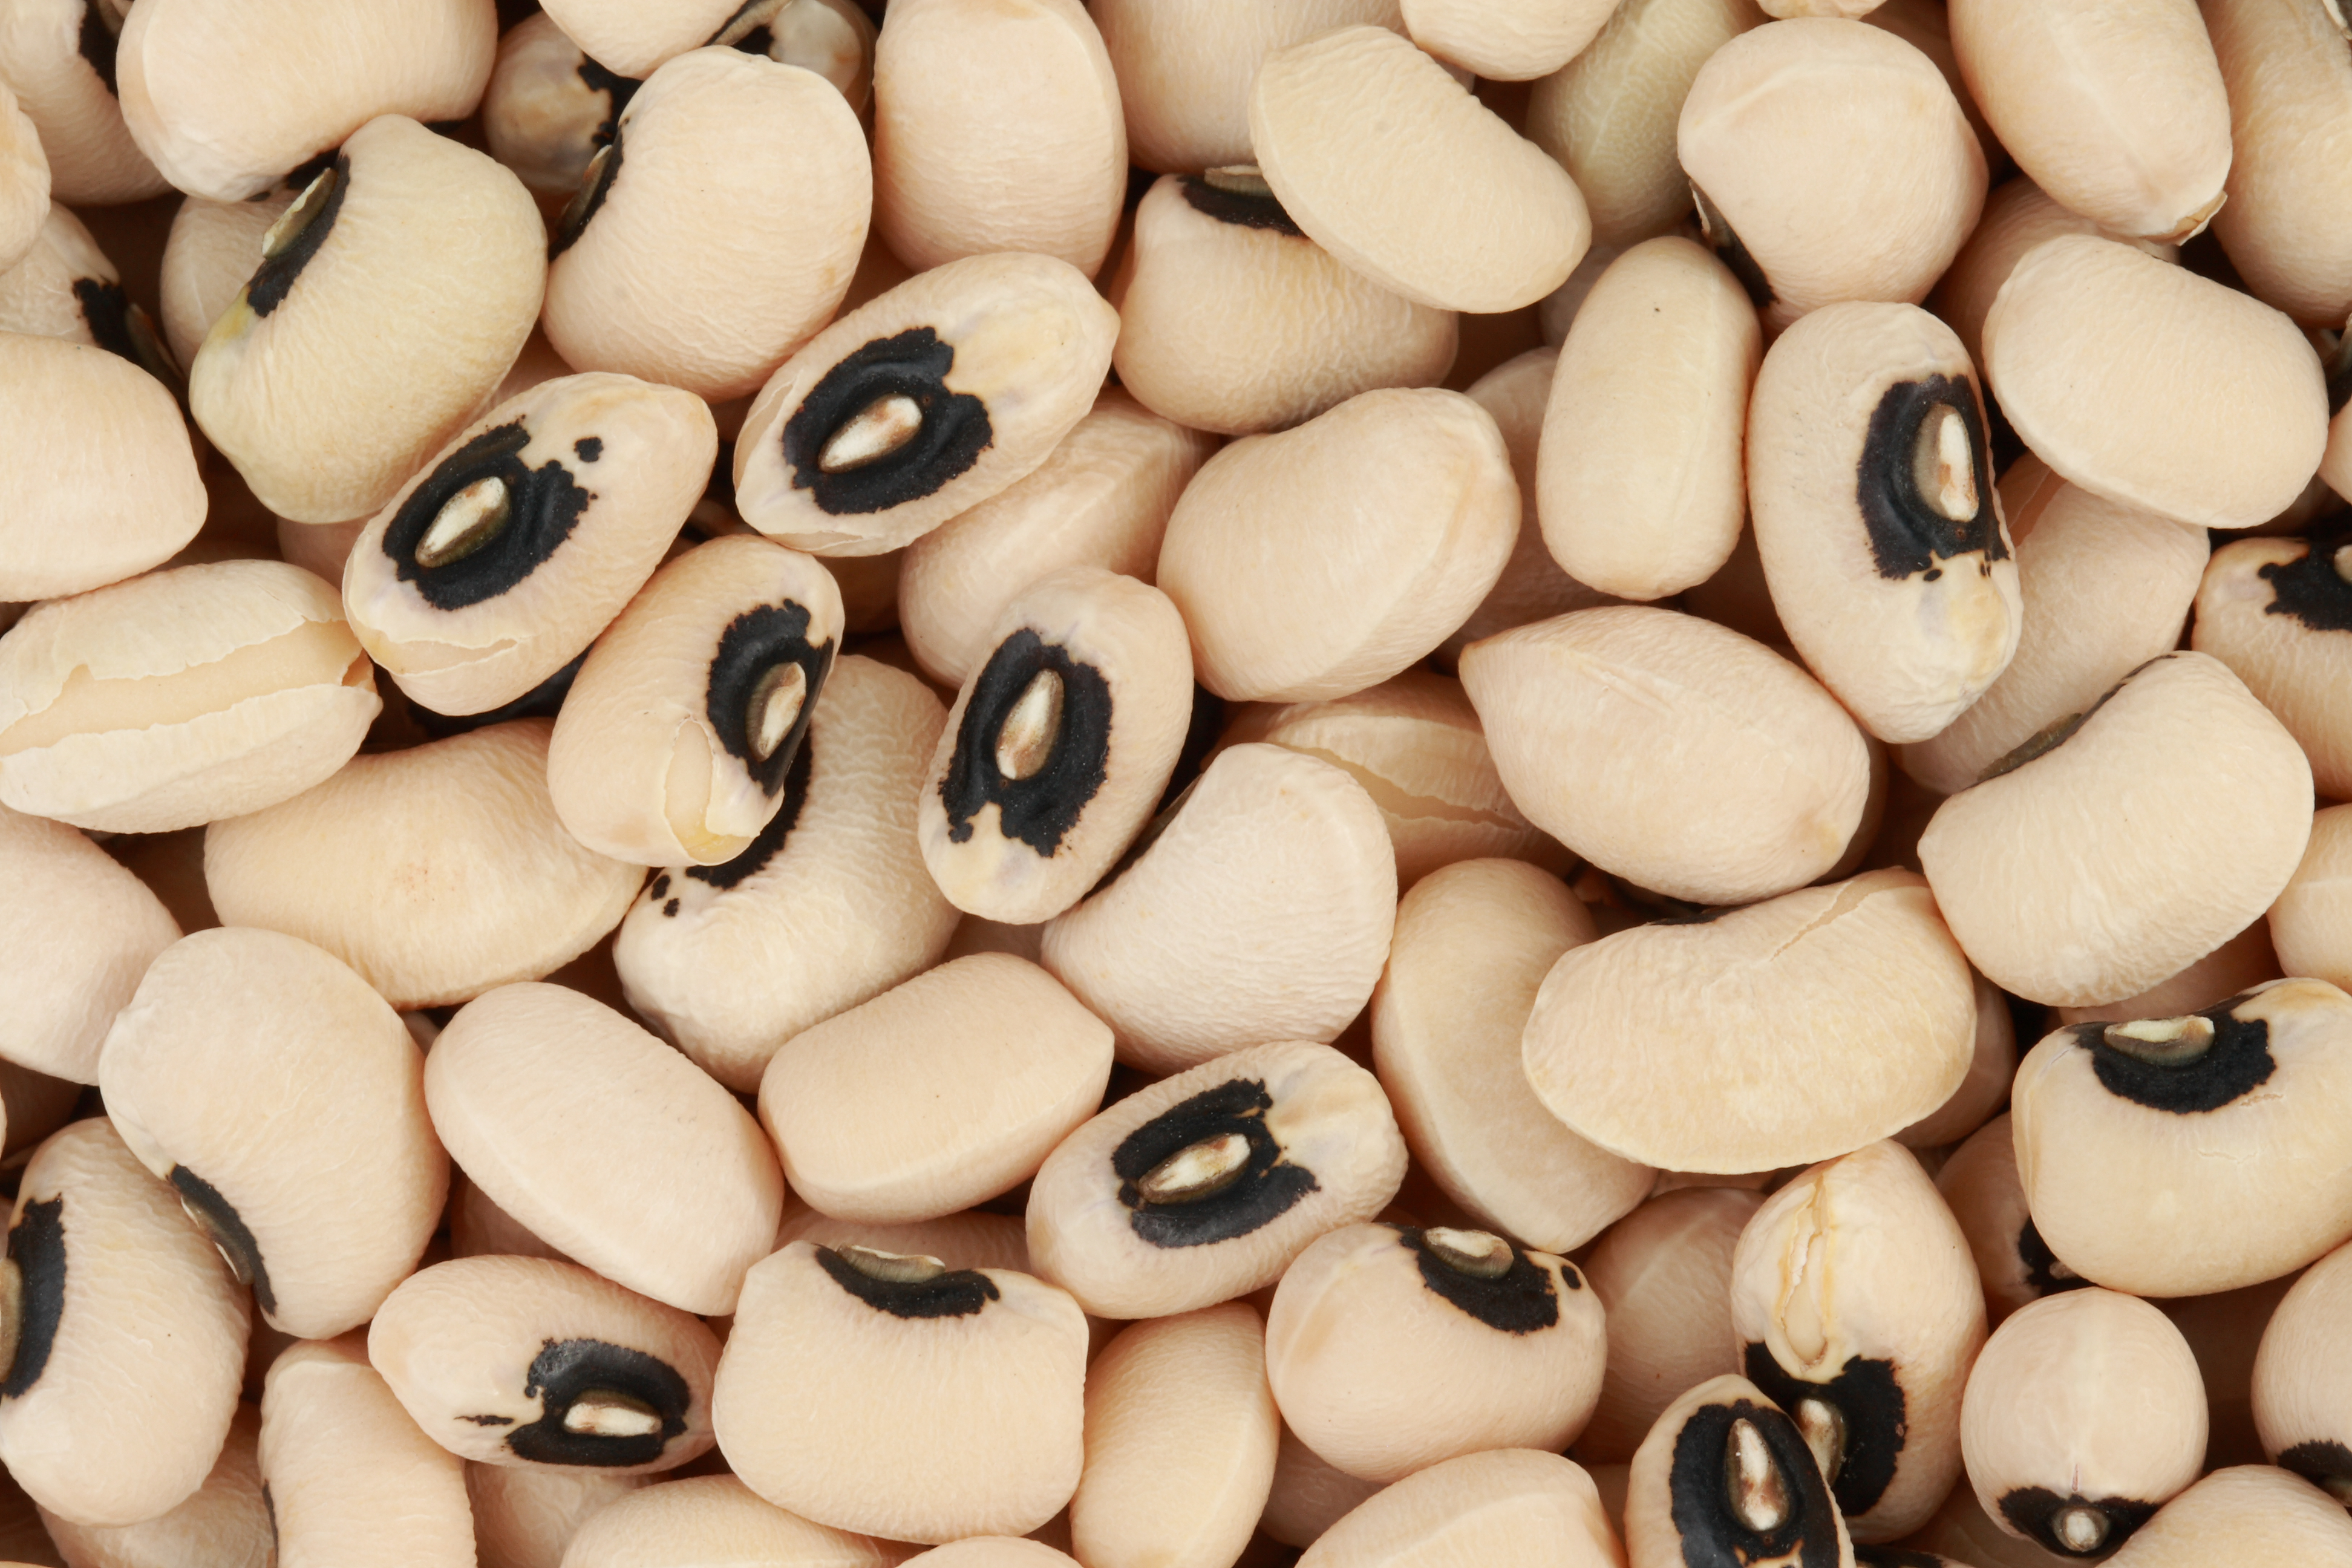 A photograph of black-eyed peas.